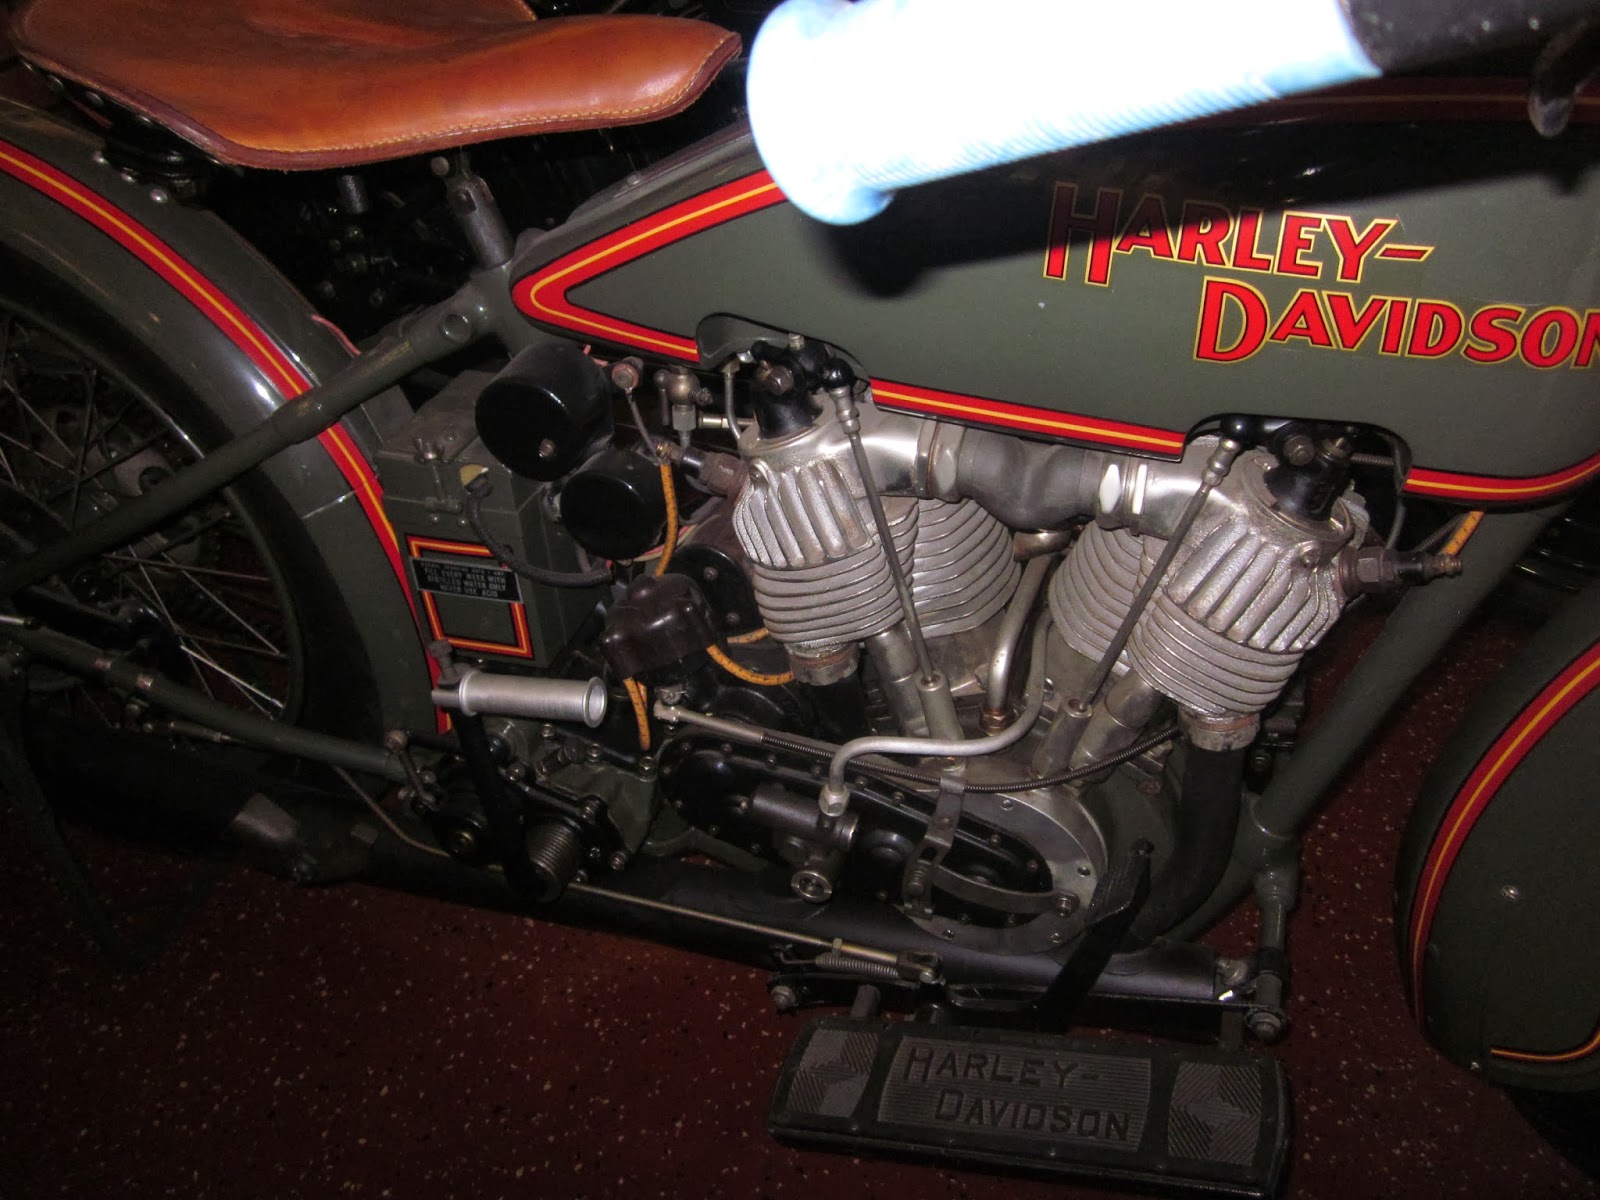 harley davidson jdcb on display at the world of motorcycles museum ...